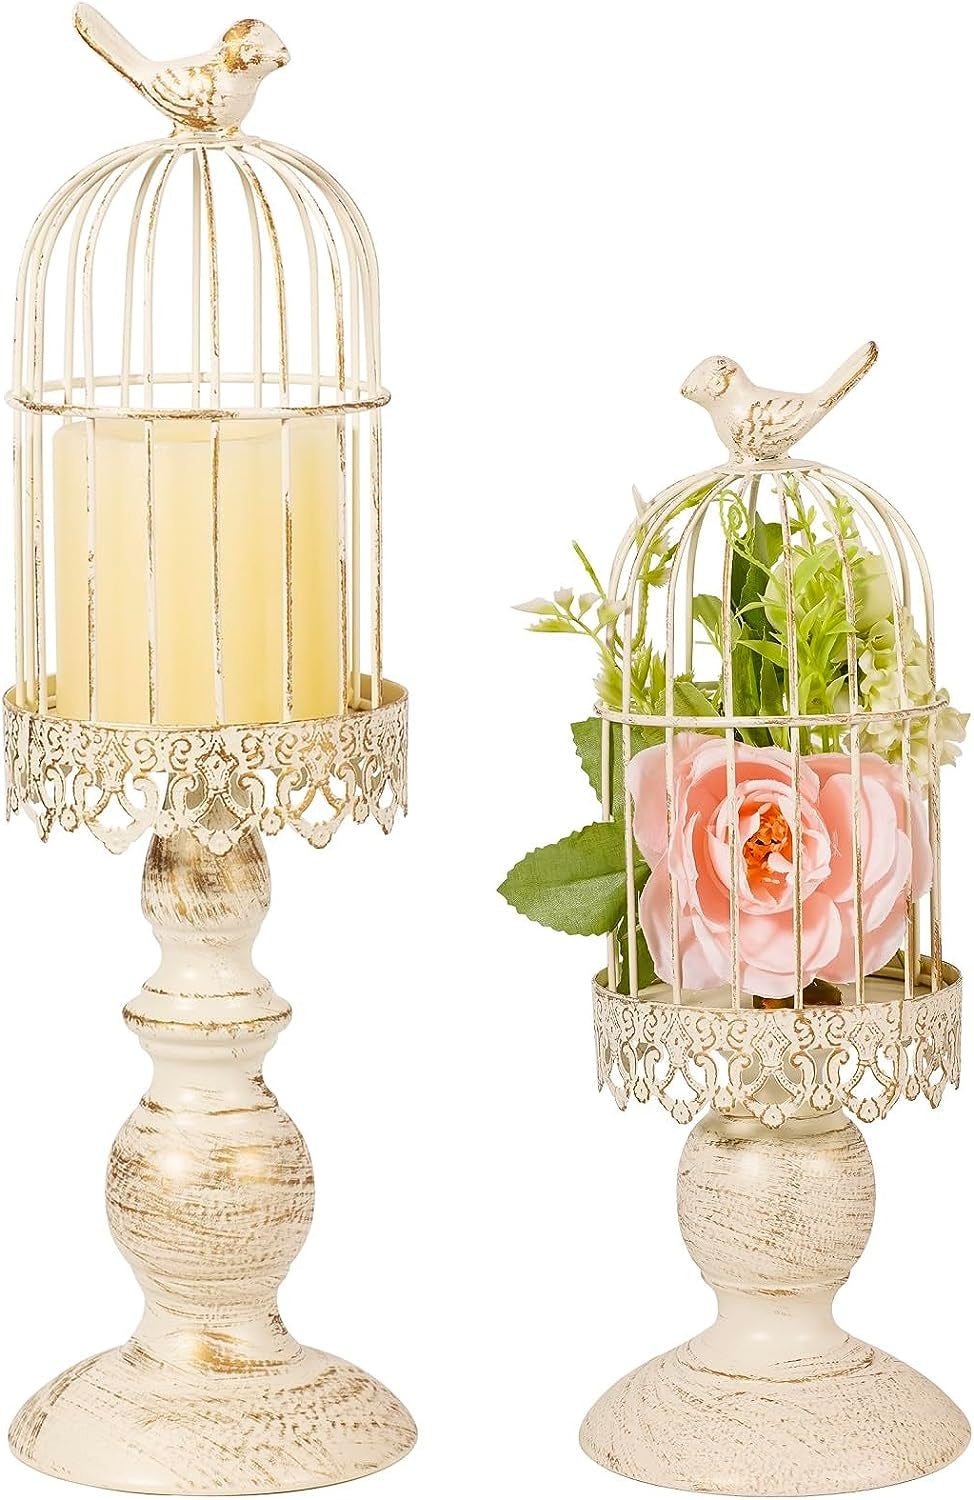 Pack of 2-Piece Birdcage Candle Holder, Vintage Candle Stick Holders, Wedding Candle Centerpieces for Tables, Iron Candlestick Holder Home Decor